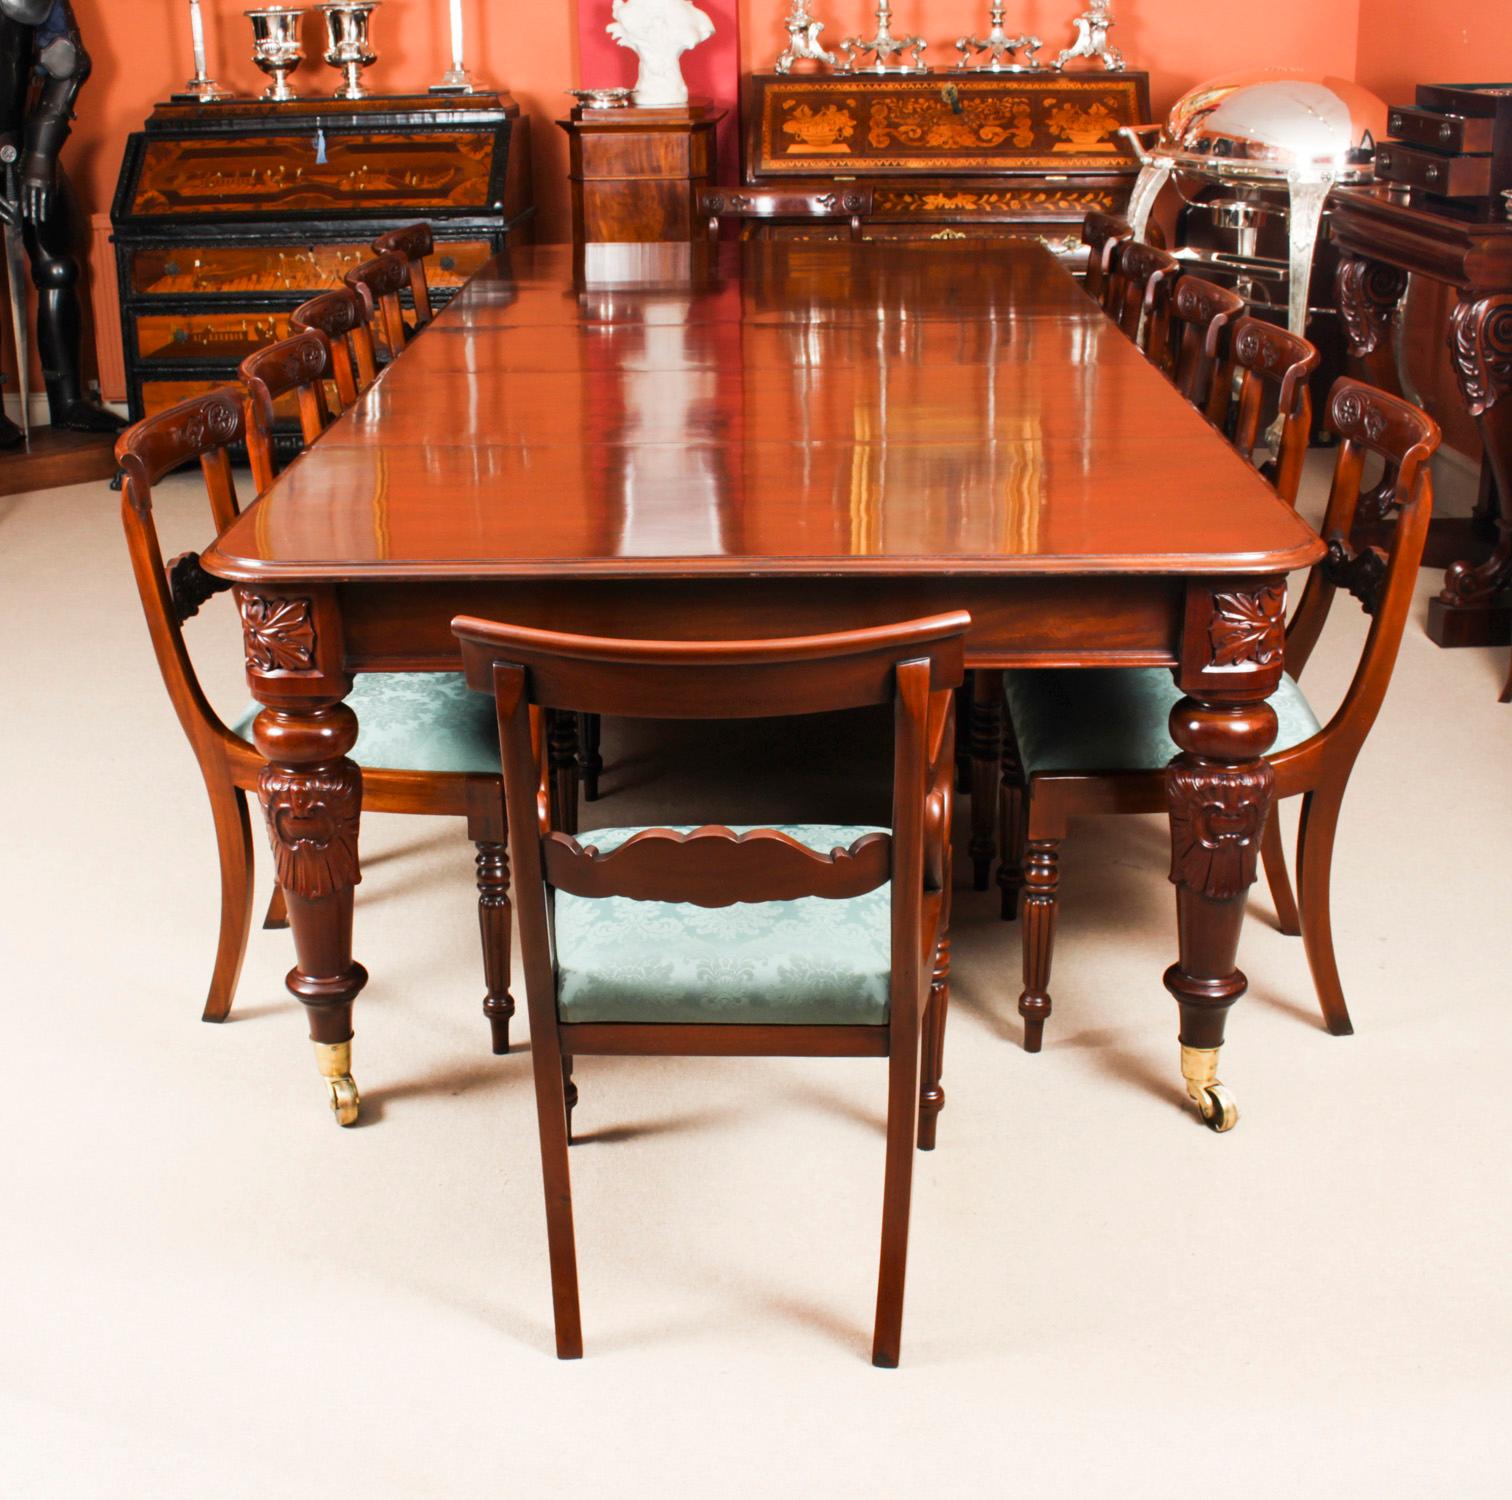 William IV Antique William iv Mahogany Dining Table 19th C & 12 Bar Back Dining Chairs